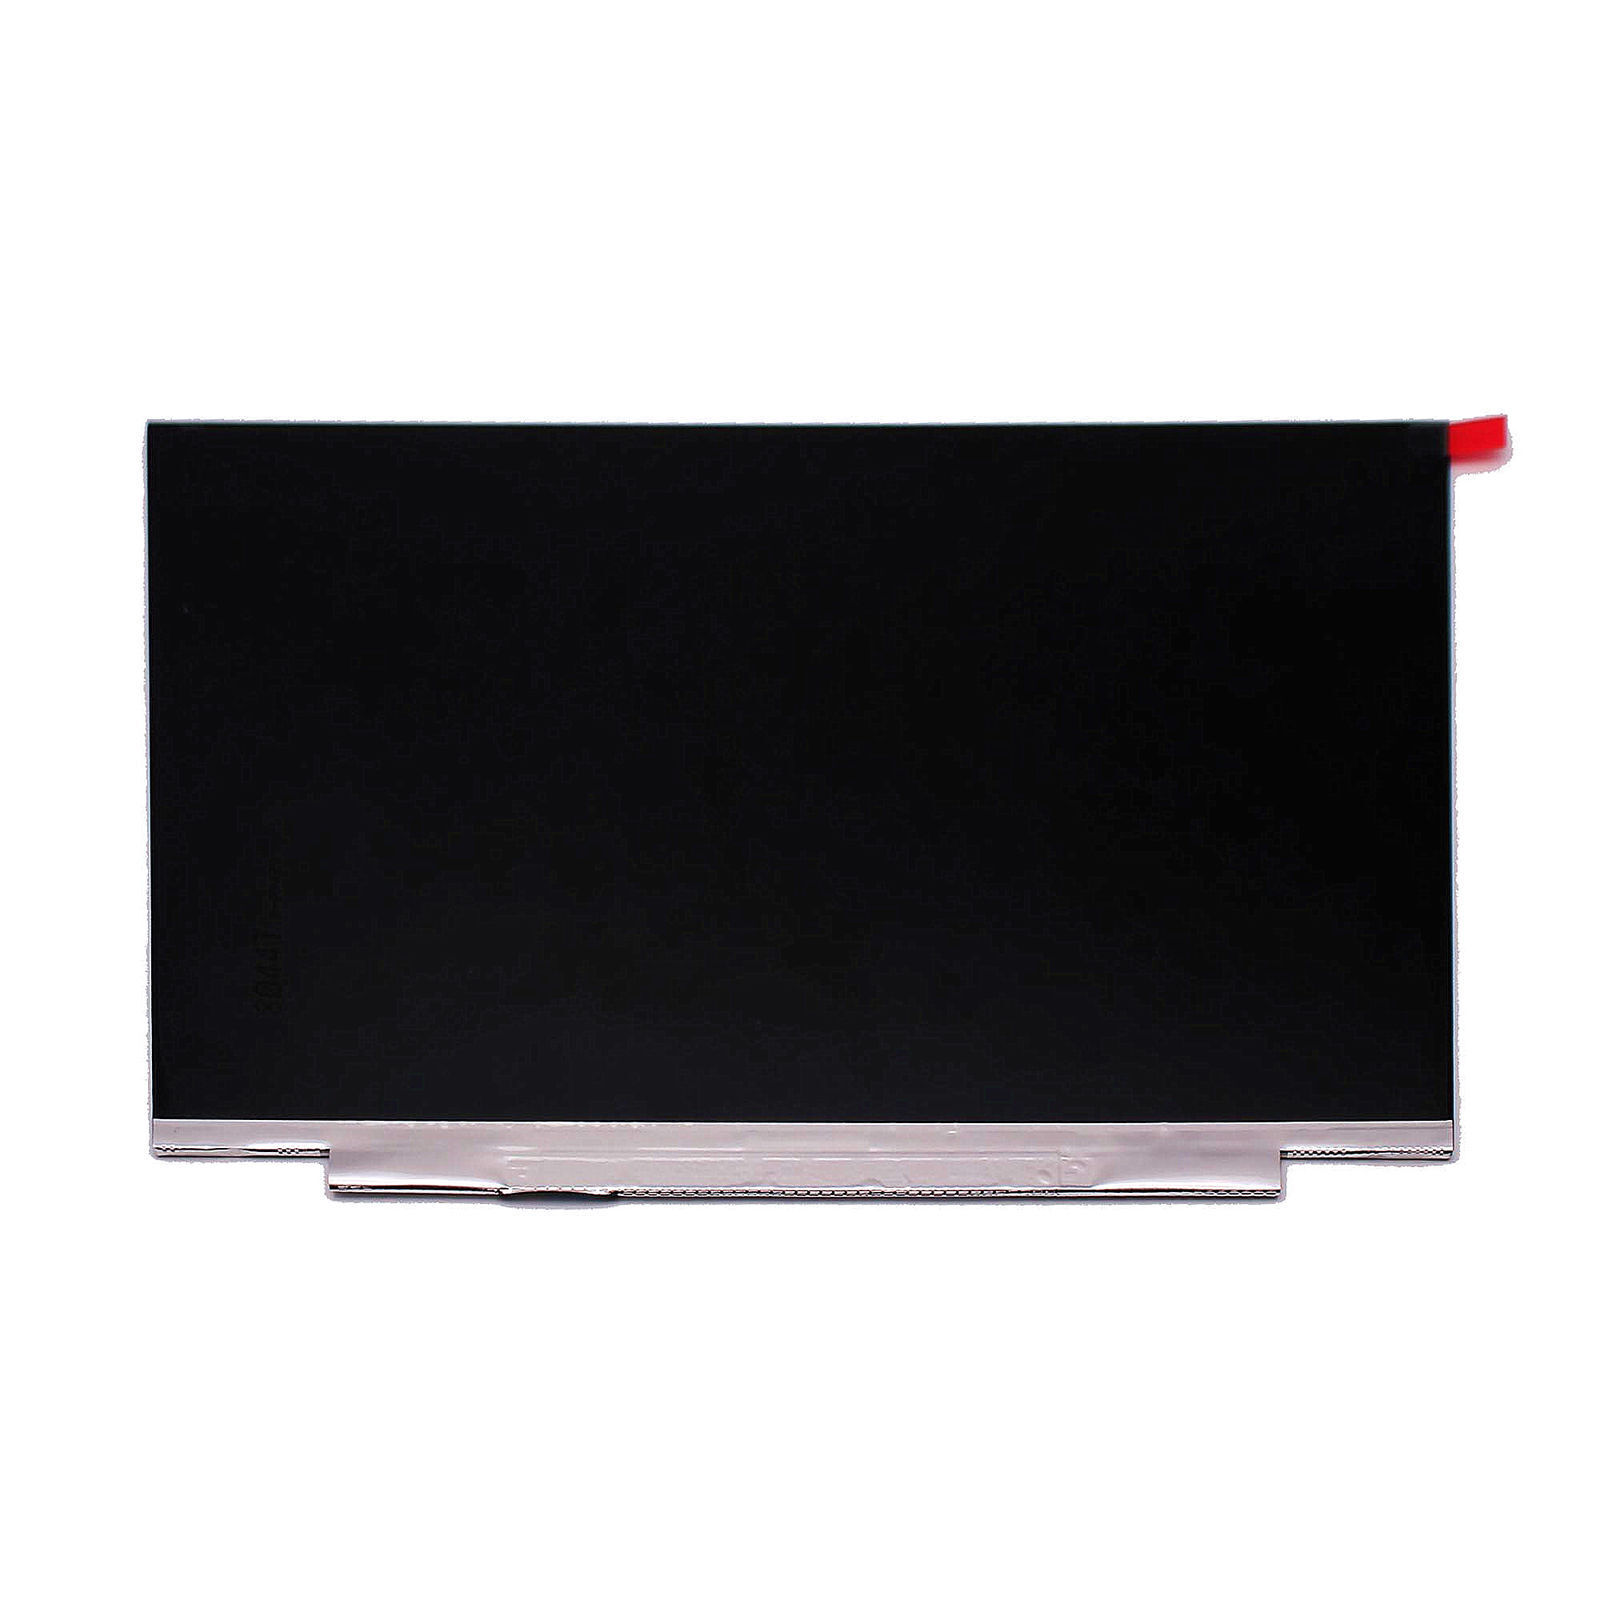 New FRU 00NY664 Non-touch LCD Panel 2560 x 1440 for Lenovo Laptop / SD10M67949